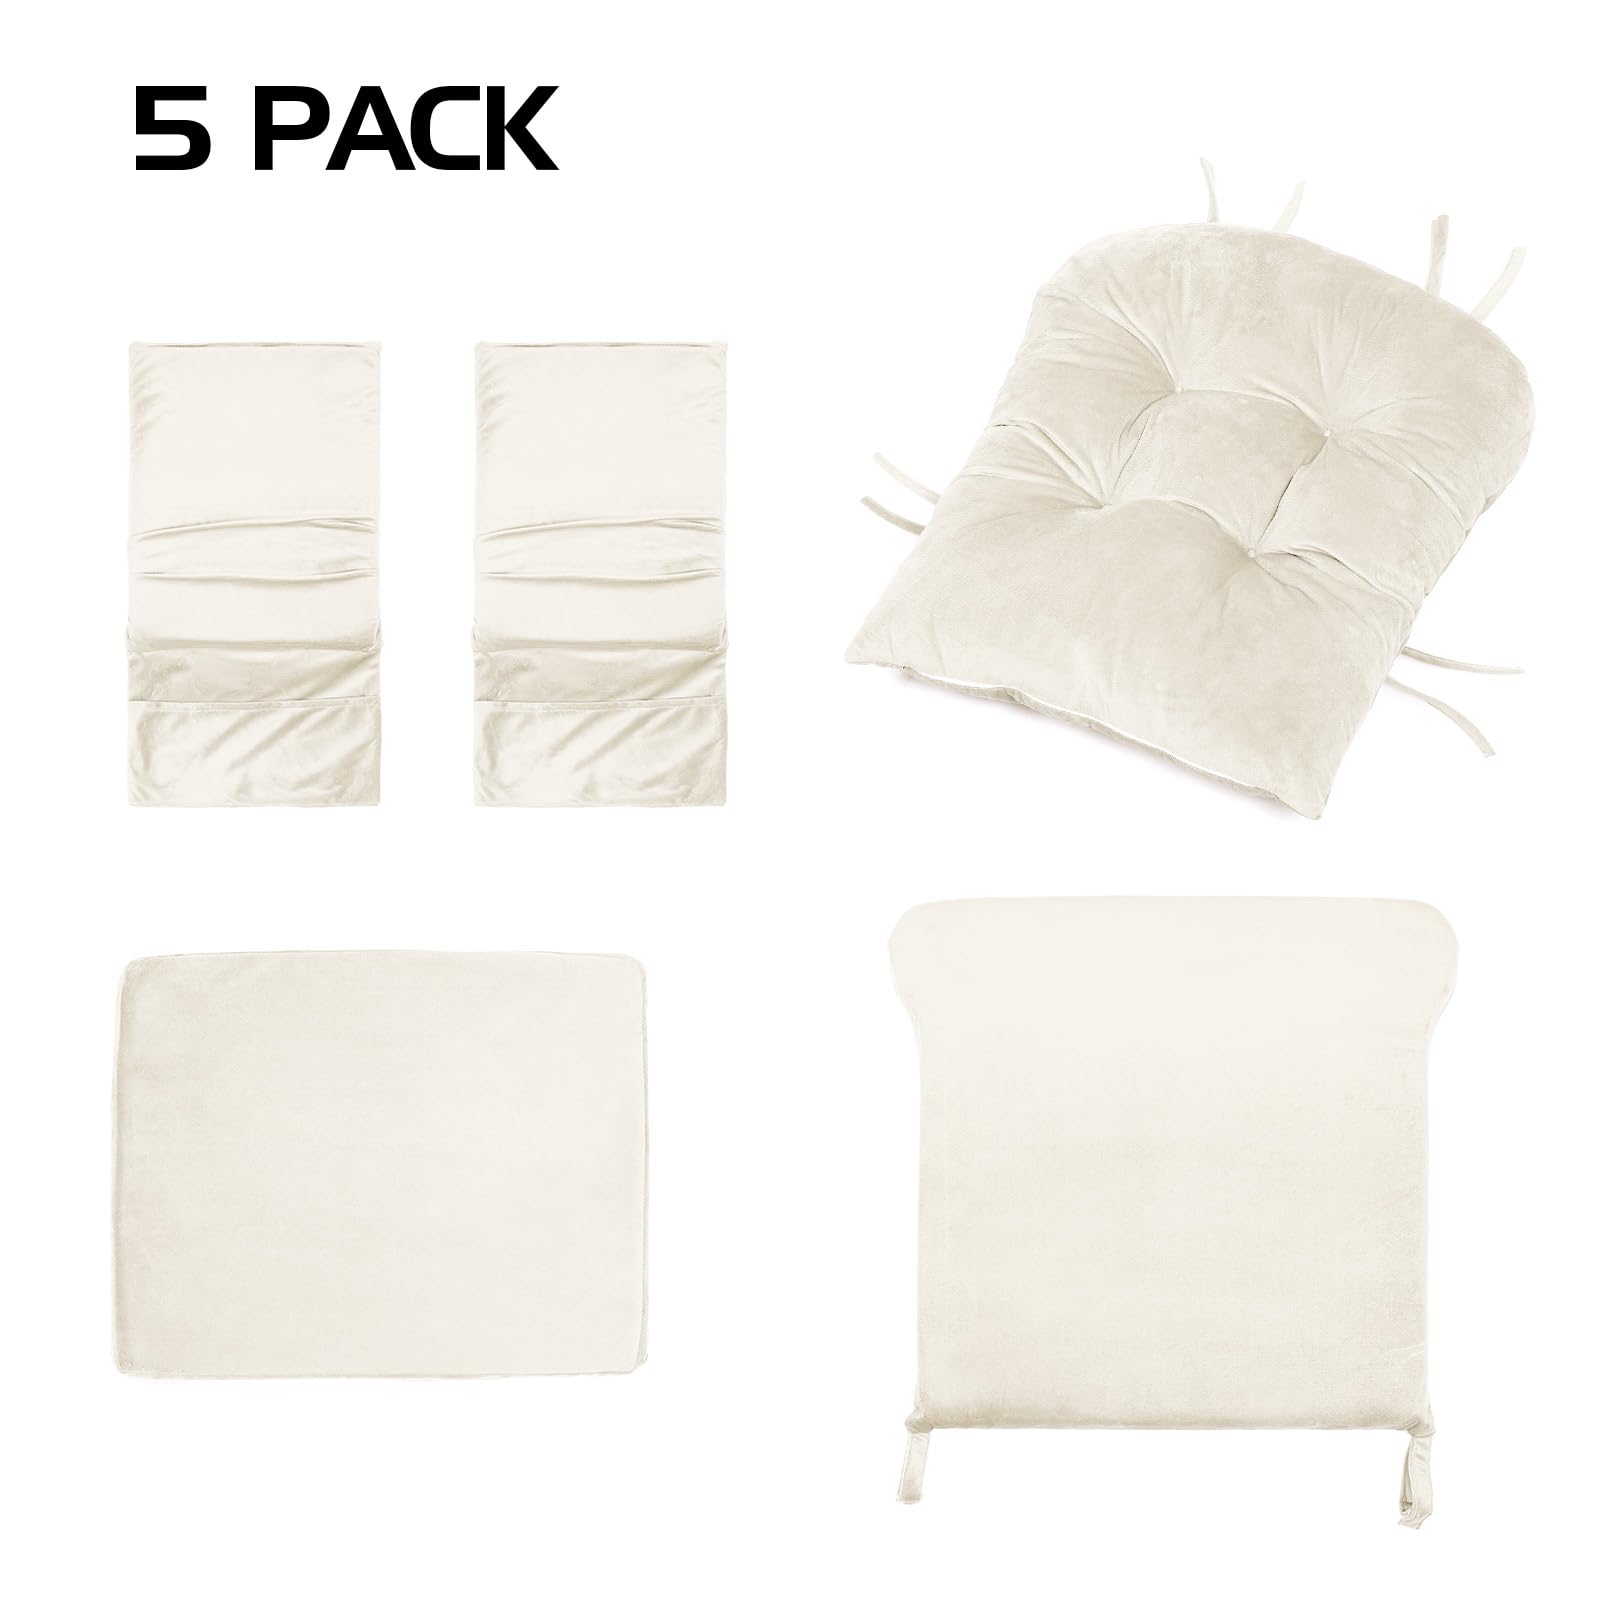 Lucky Monet 5Pcs Glider Rocker Replacement Cushions - Velvet Glider Cushions Replacement Set with Side Storage Pockets, Thick Glider Chair Cushions Washable & Non Slip, Cushion ONLY - Beige